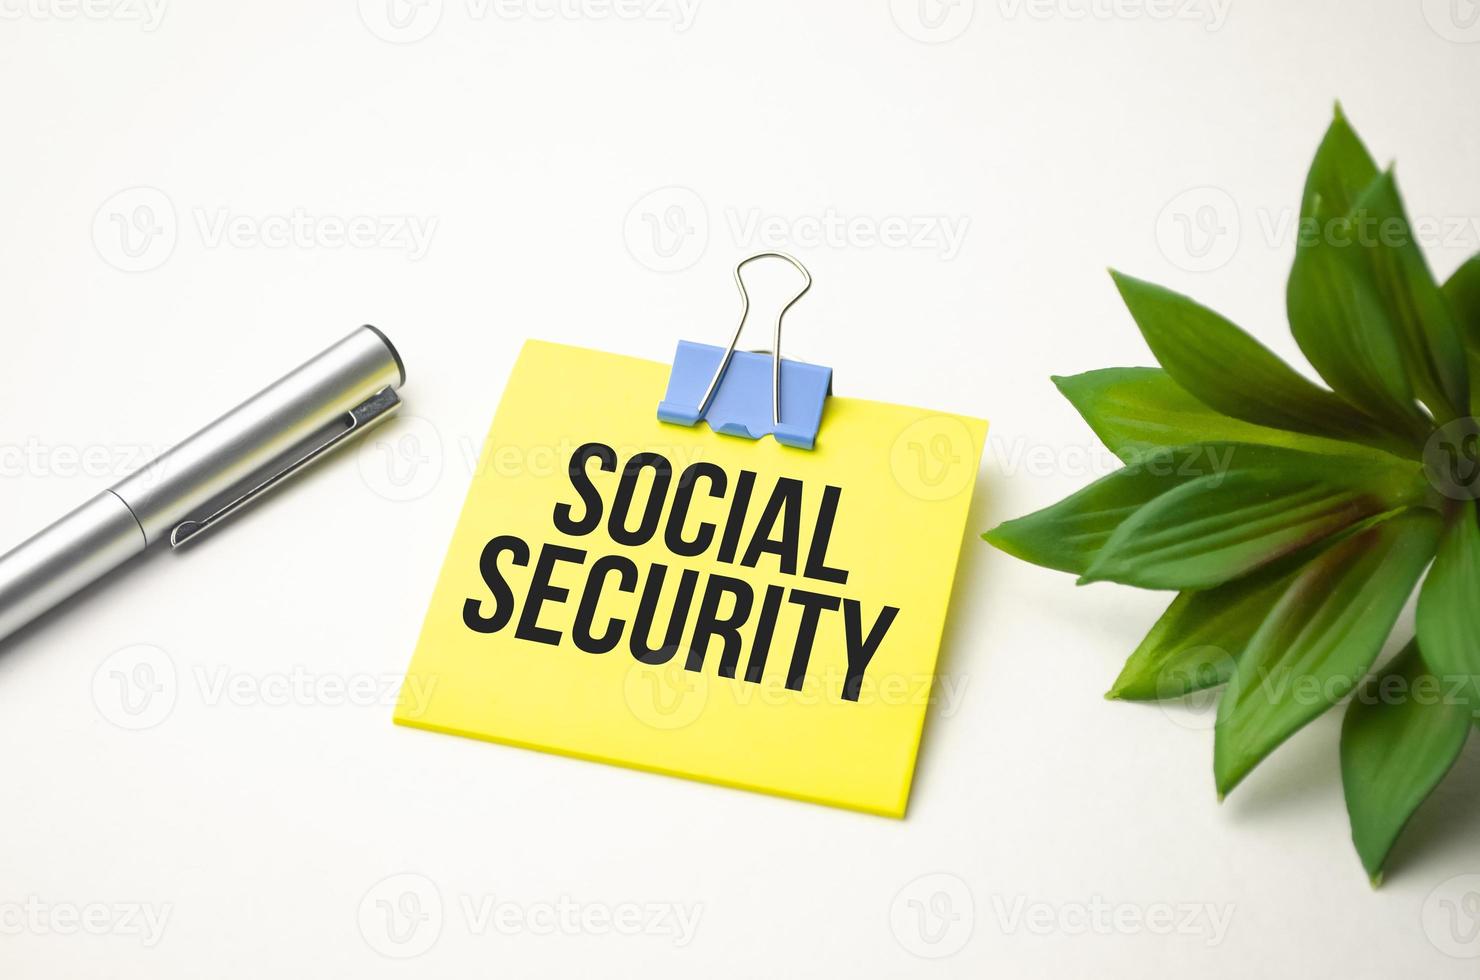 The text Social Security on yellow sticker and white background photo